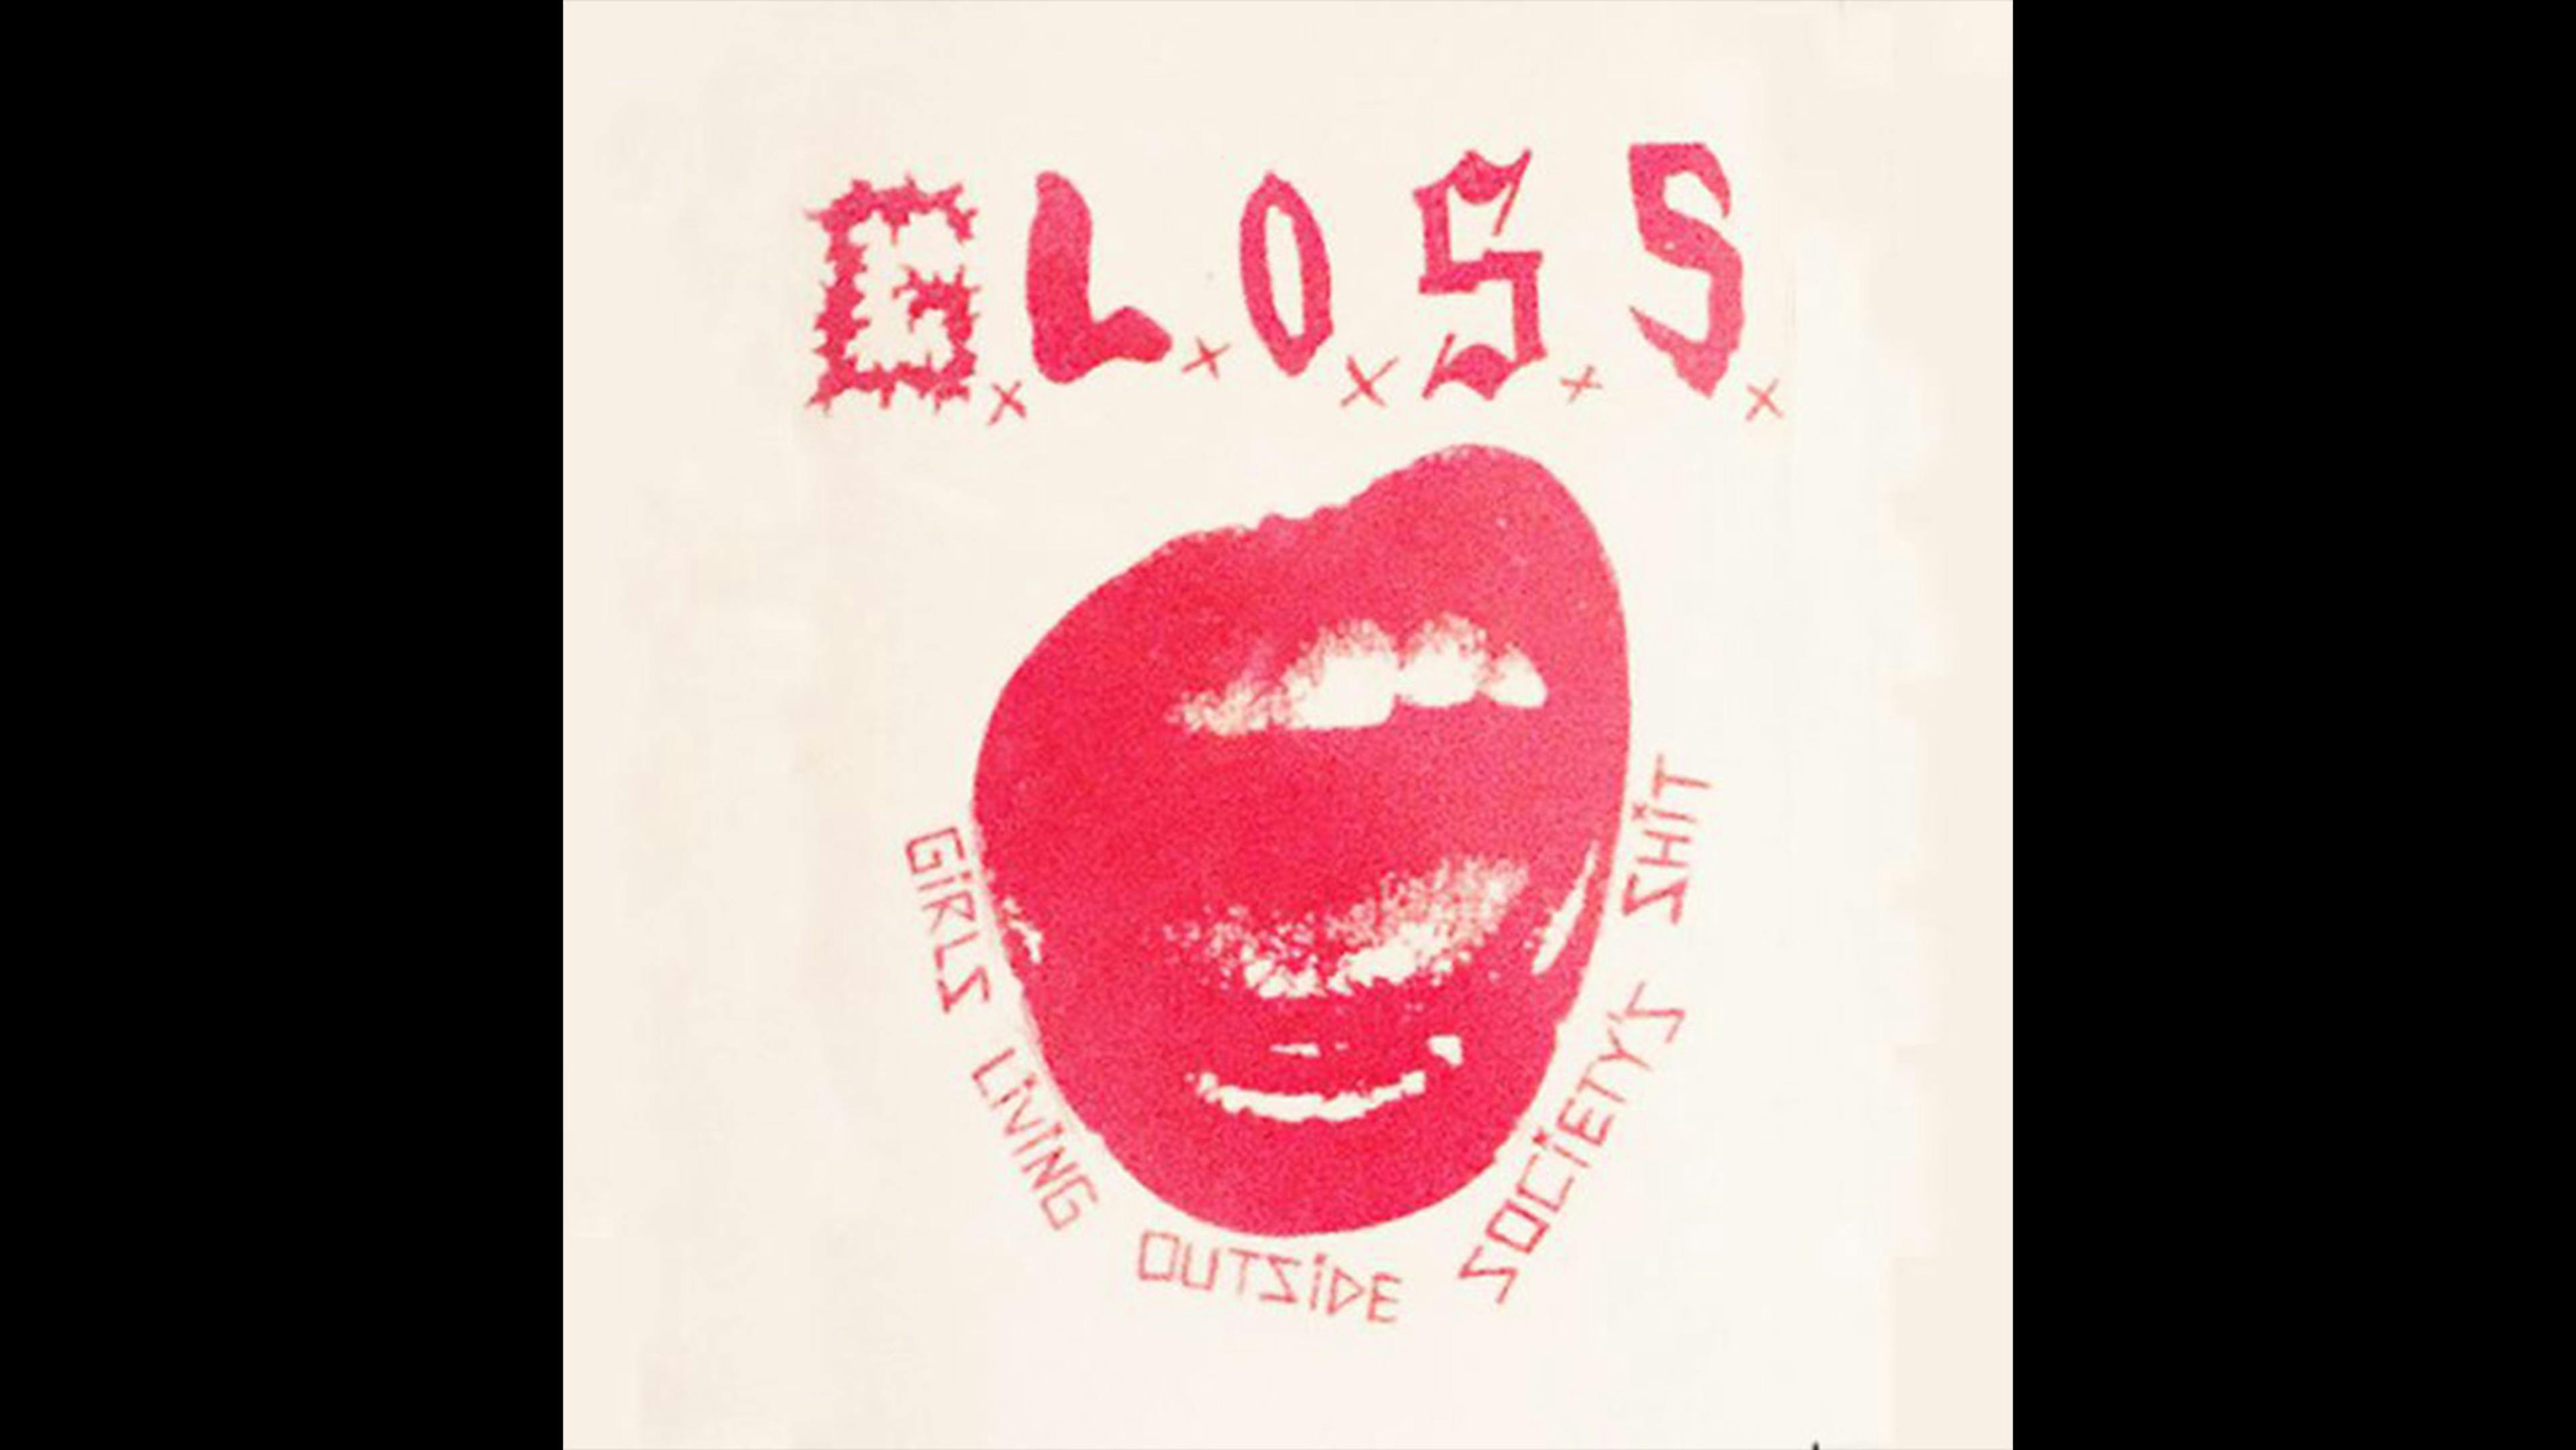 A sadly all-too-short lived queercore crew with several transgender members, G.L.O.S.S. gained a degree of infamy in 2016 when they turned down a lucrative offer to release their music on Epitaph, shortly before disbanding. But as proved on this Molotov cocktail of a debut, their music deserves a greater legacy than a mere footnote in punk history, such is its clenched-fist fury and palpable desperation for societal change.